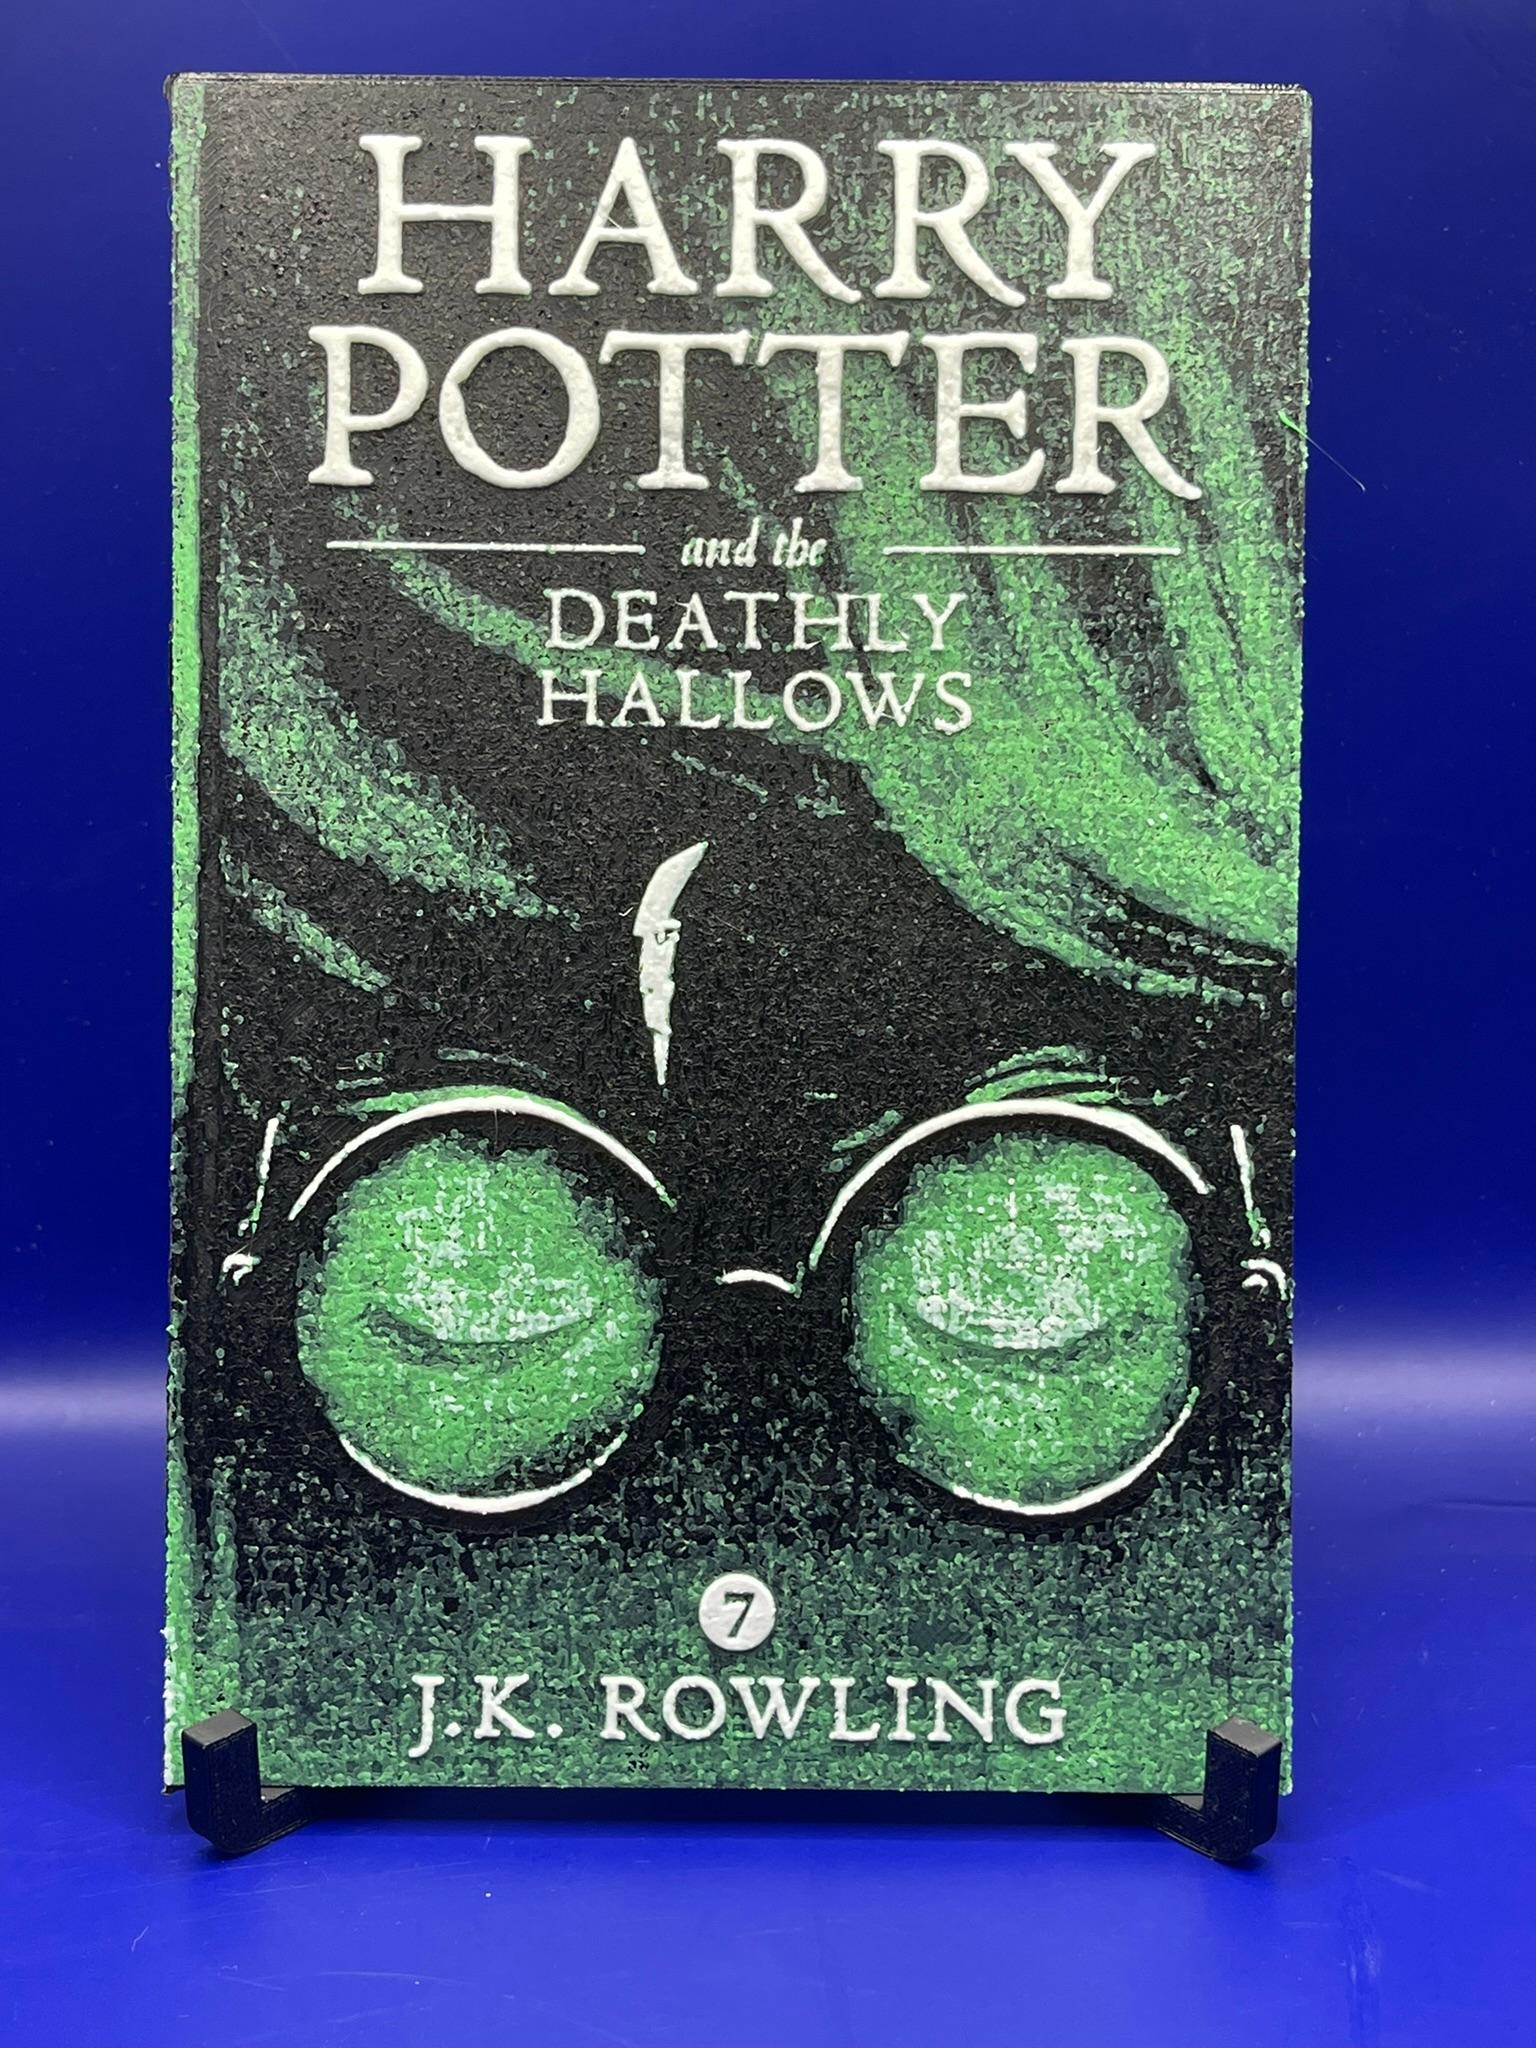 Harry Potter and the Deathly Hallows HueForge Book Cover Fan Art 3d model